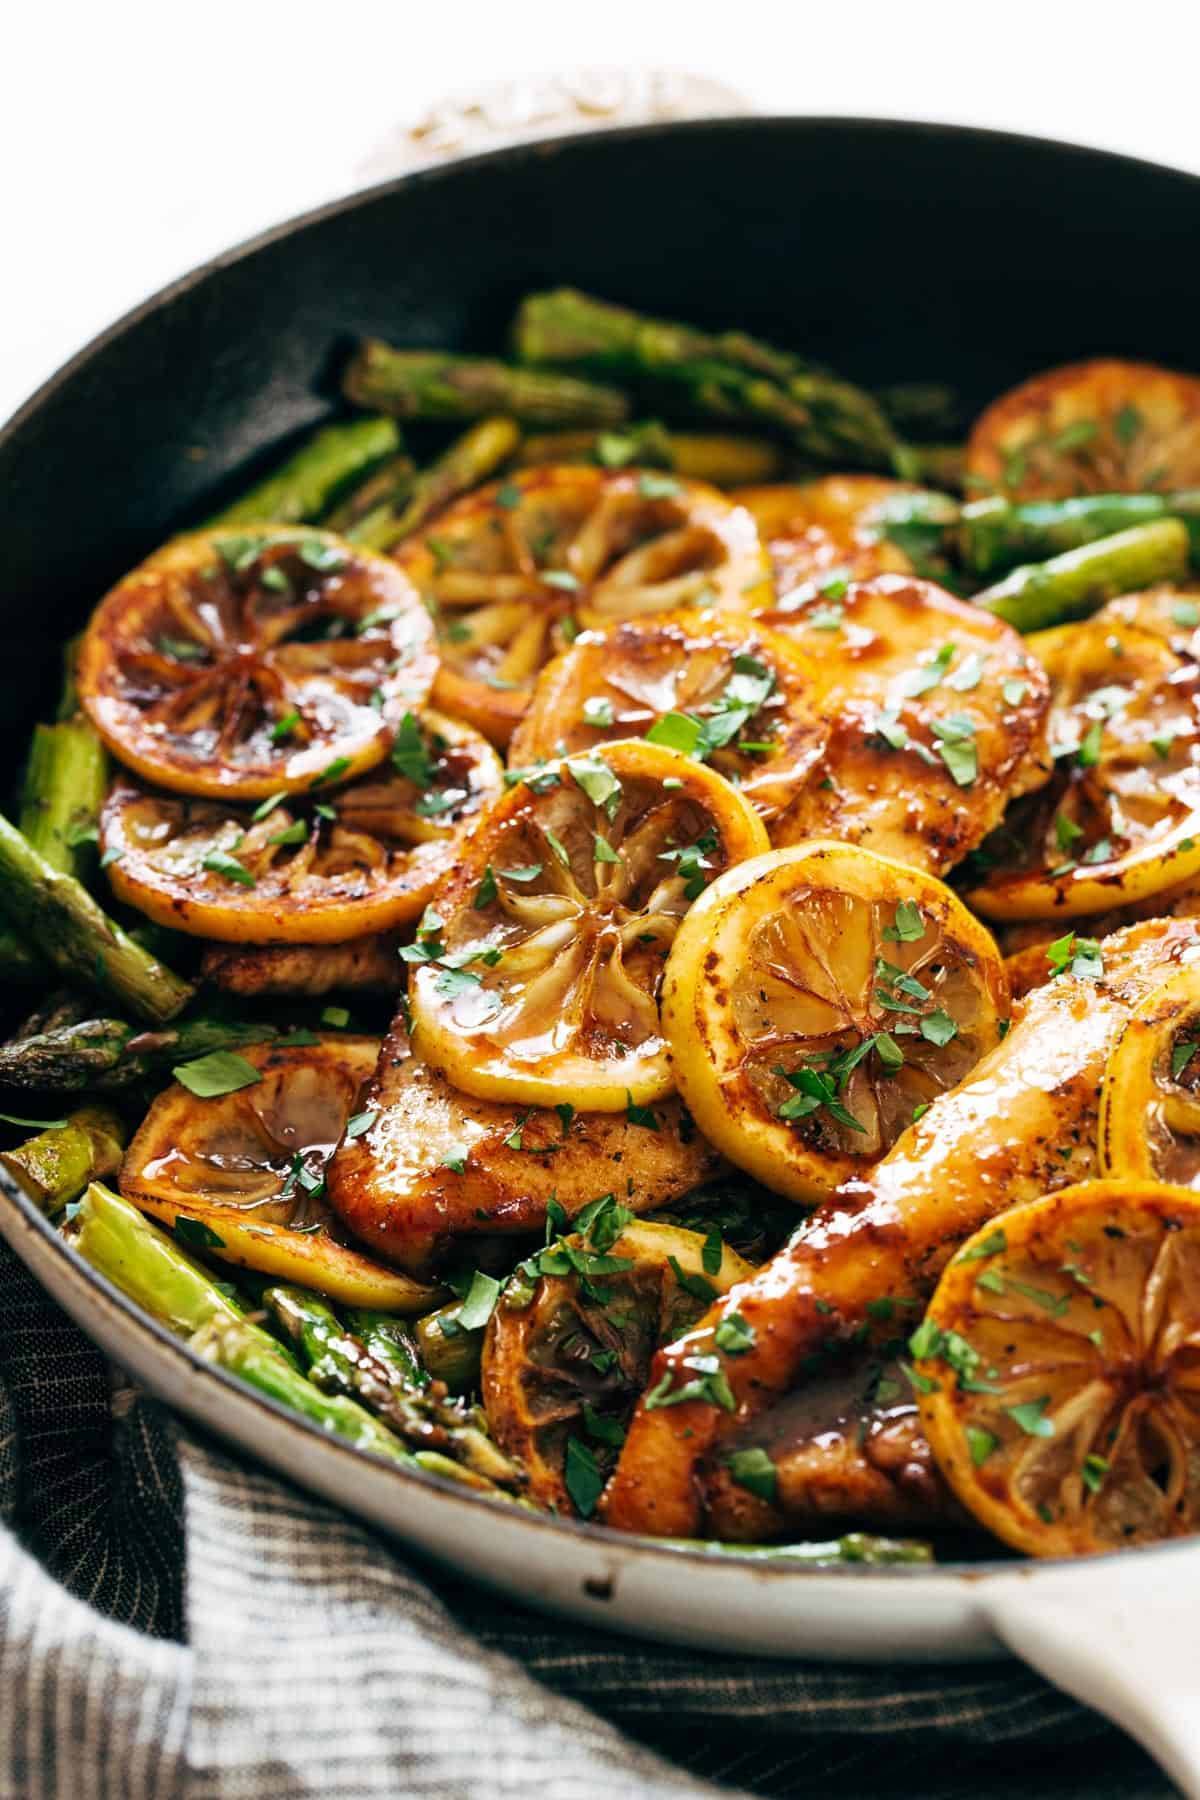 Lemon chicken with asparagus in a pan